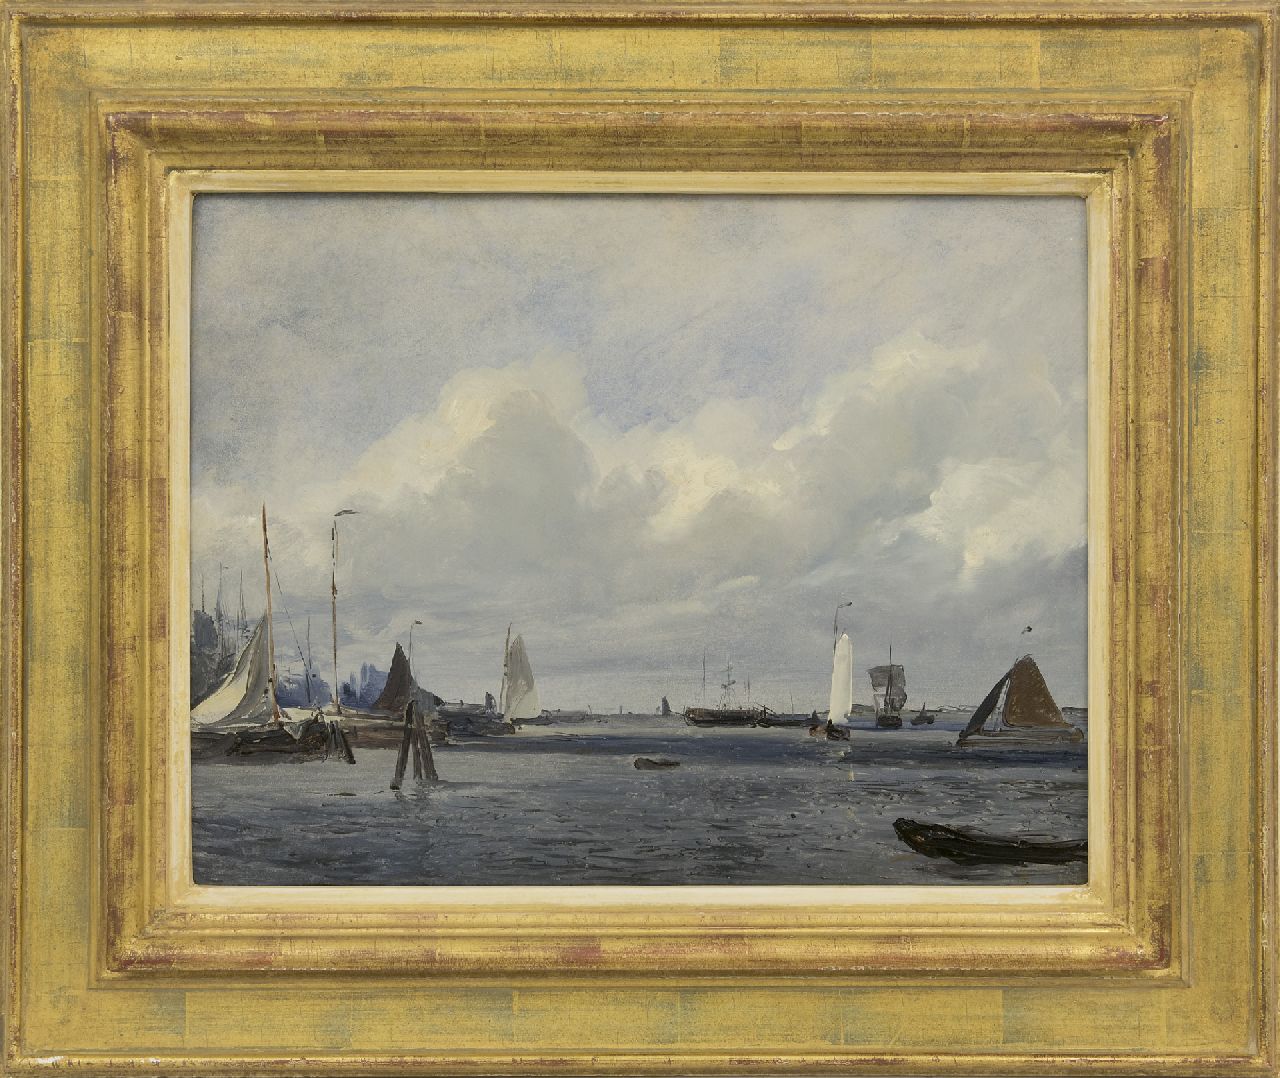 Deventer W.A. van | 'Willem' Anthonie van Deventer | Paintings offered for sale | A harbour view, oil on painter's board 33.4 x 43.4 cm